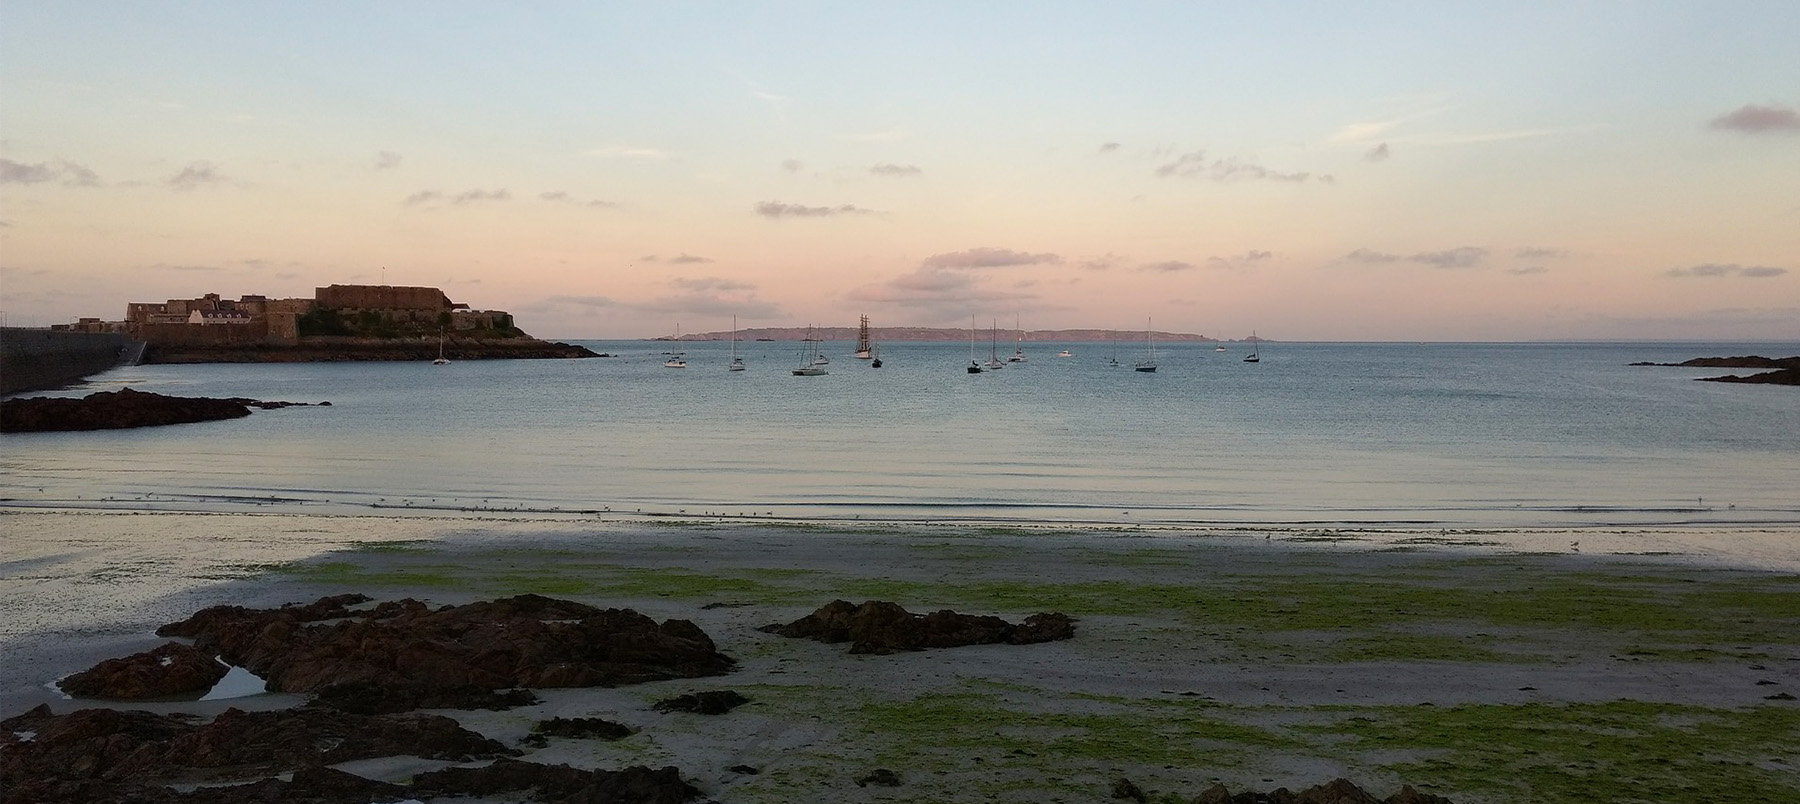 Channel islands at sunset